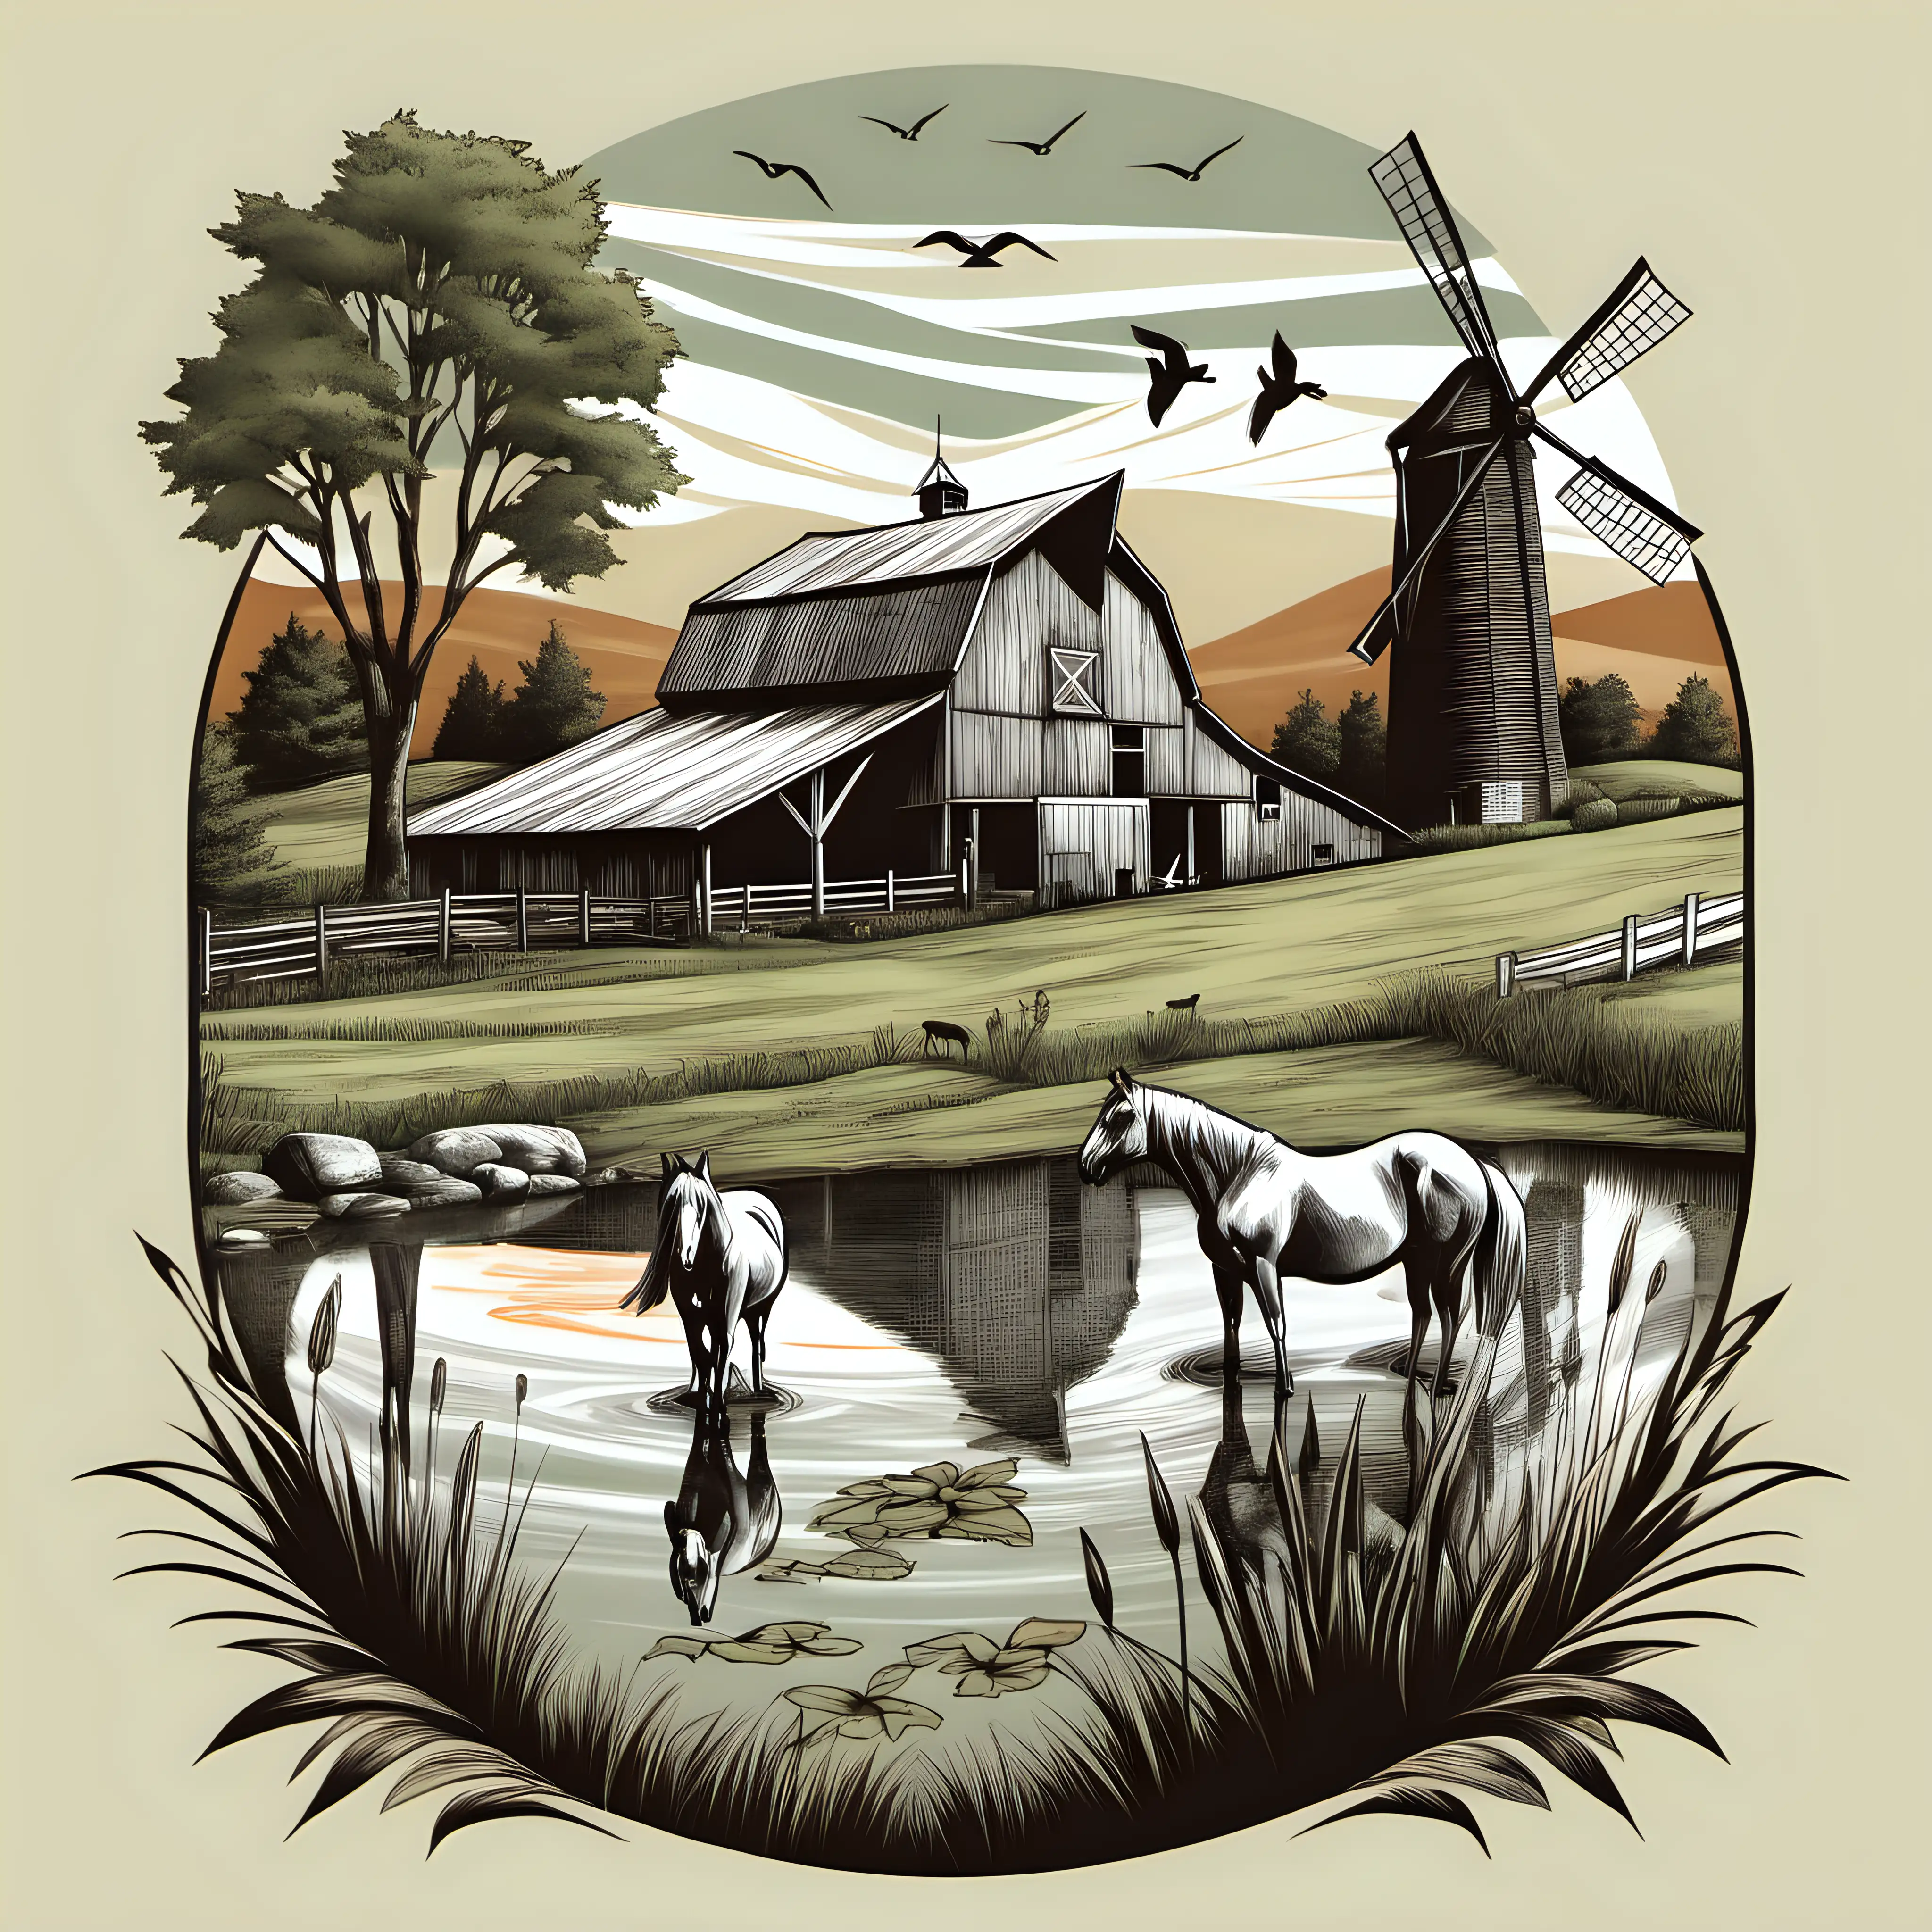 dutch gable old barn illustration in a pasture with horses with a pond behind it with Appalachian wv with windmills on the hilltop.  t-shirt design